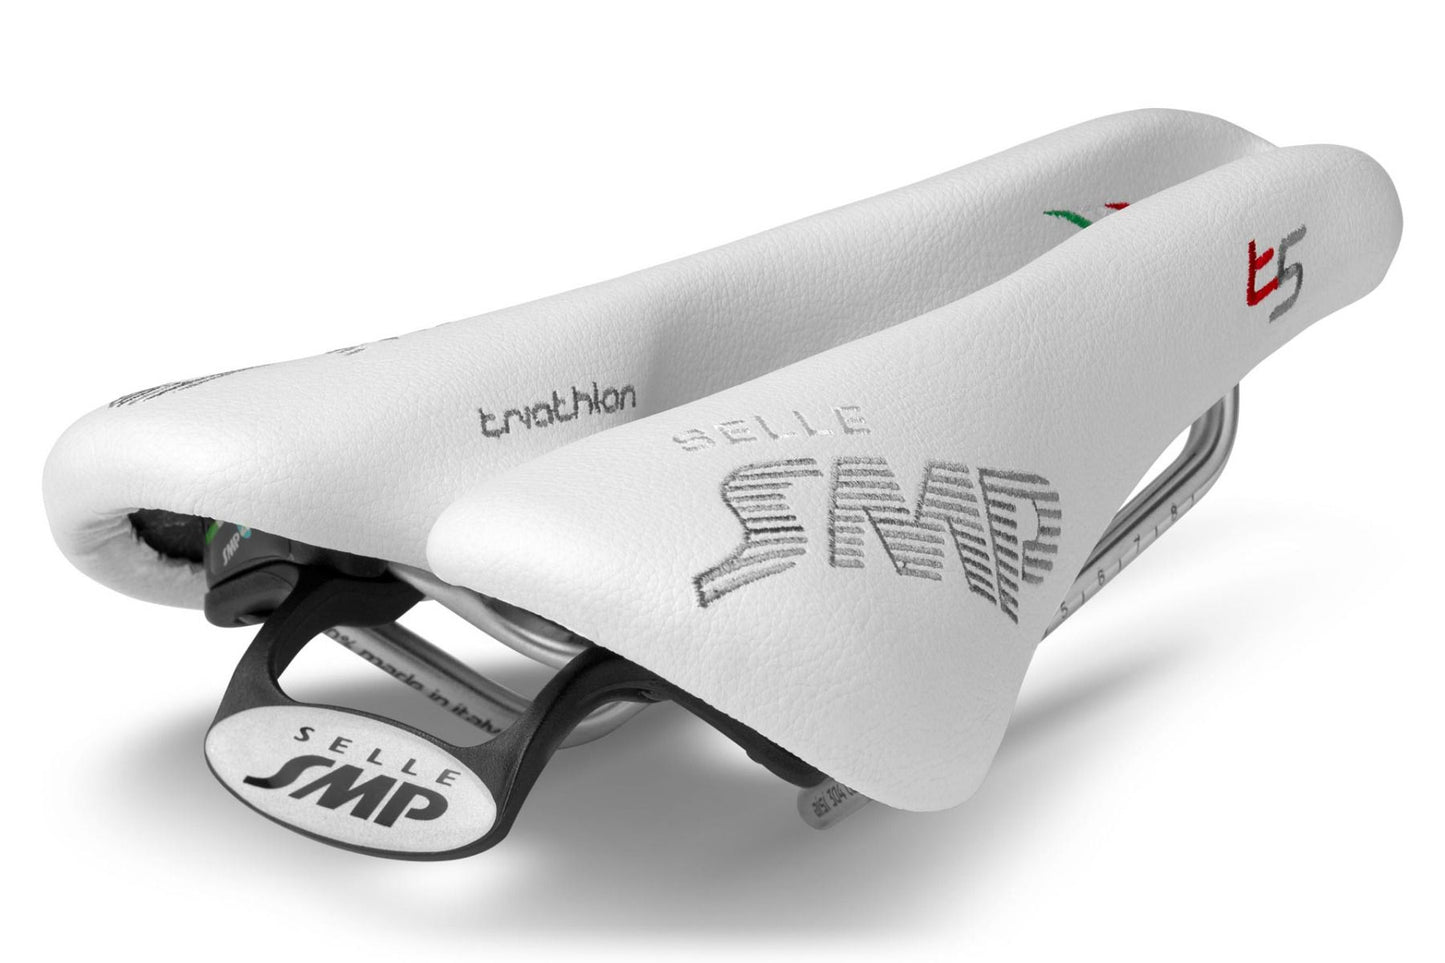 Selle SMP T5 Triathlon Saddle with Steel Rails (White)